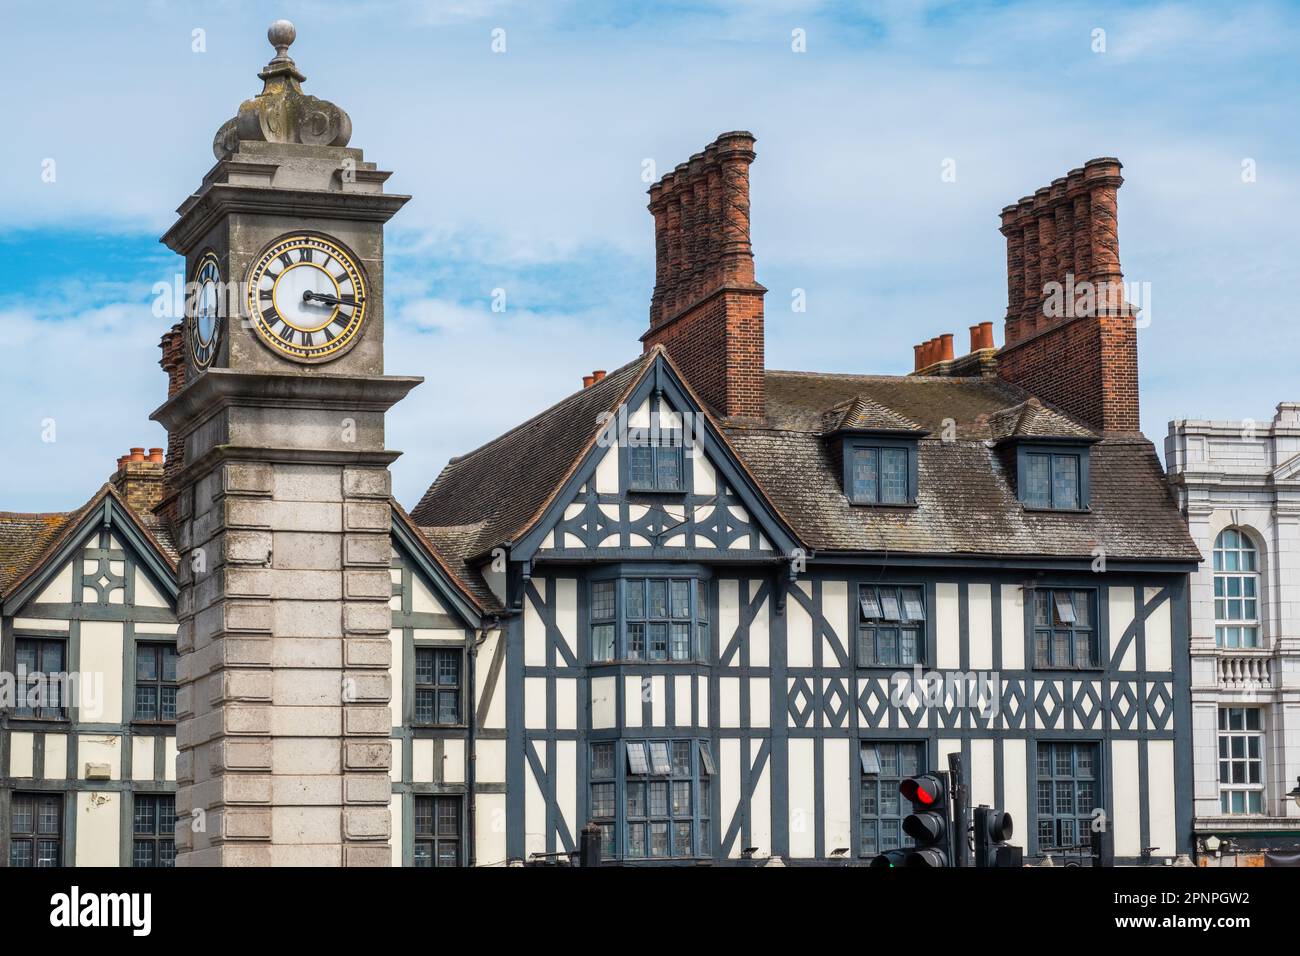 Victorian clock tower next to the half-timbered buildings in Clapham district. London, England Stock Photo